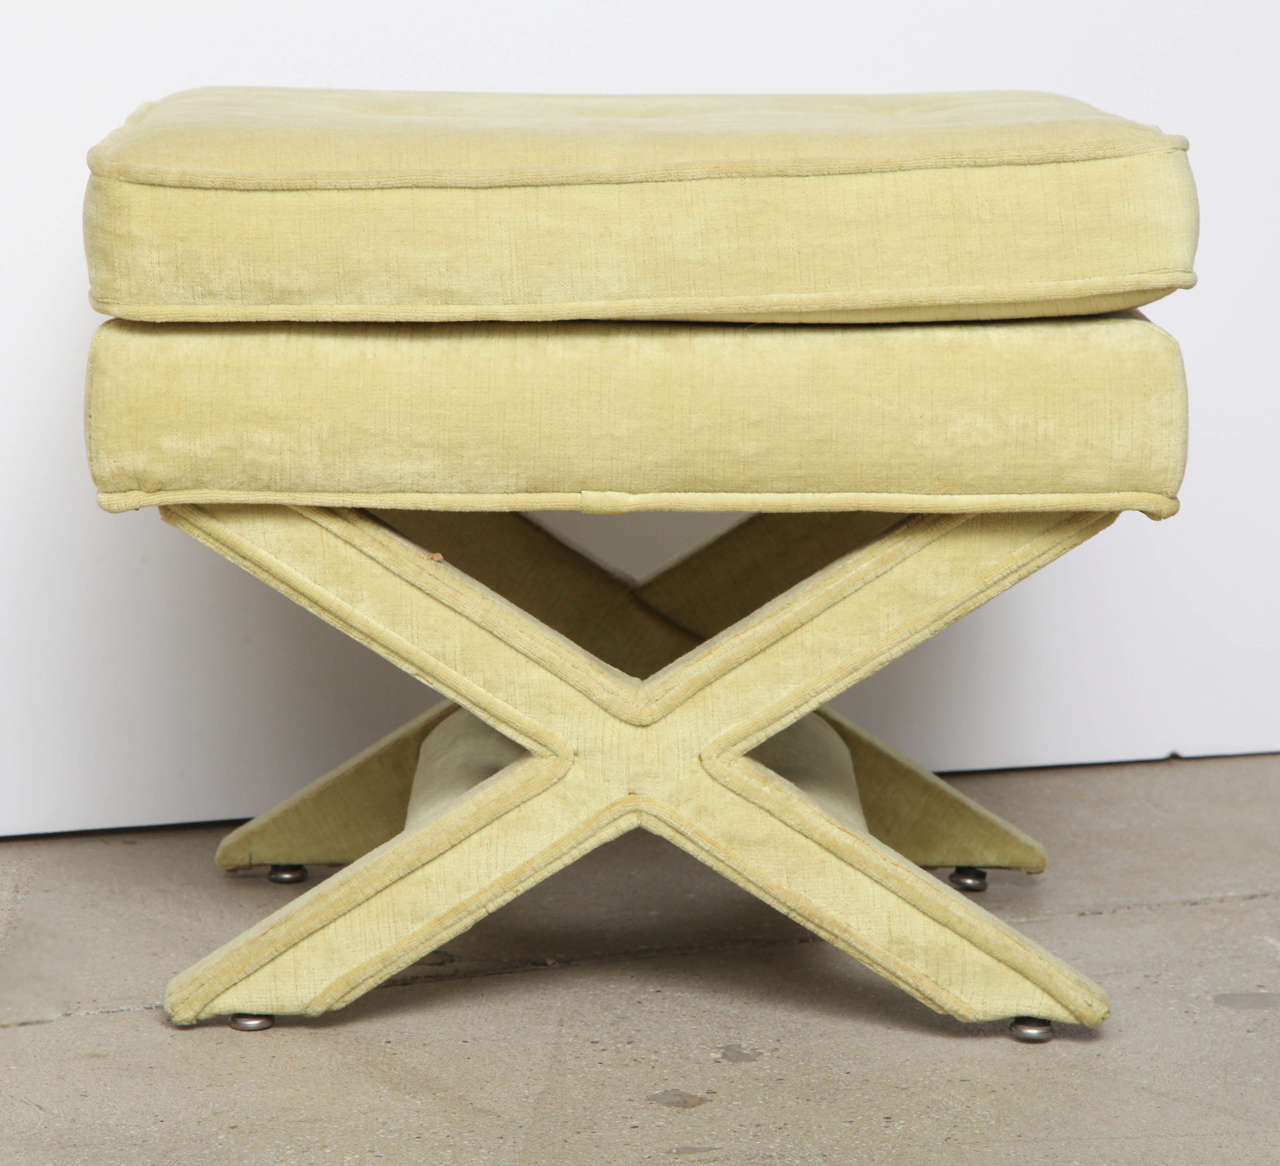 Vintage upholstered ottoman / bench with tufted cushion top and X-shaped base in the style of Billy Baldwin.  Original chartreuse velvet upholstery. USA, circa 1970.  Reupholstery in COM available for a fee.

Provenance: From the estate of architect